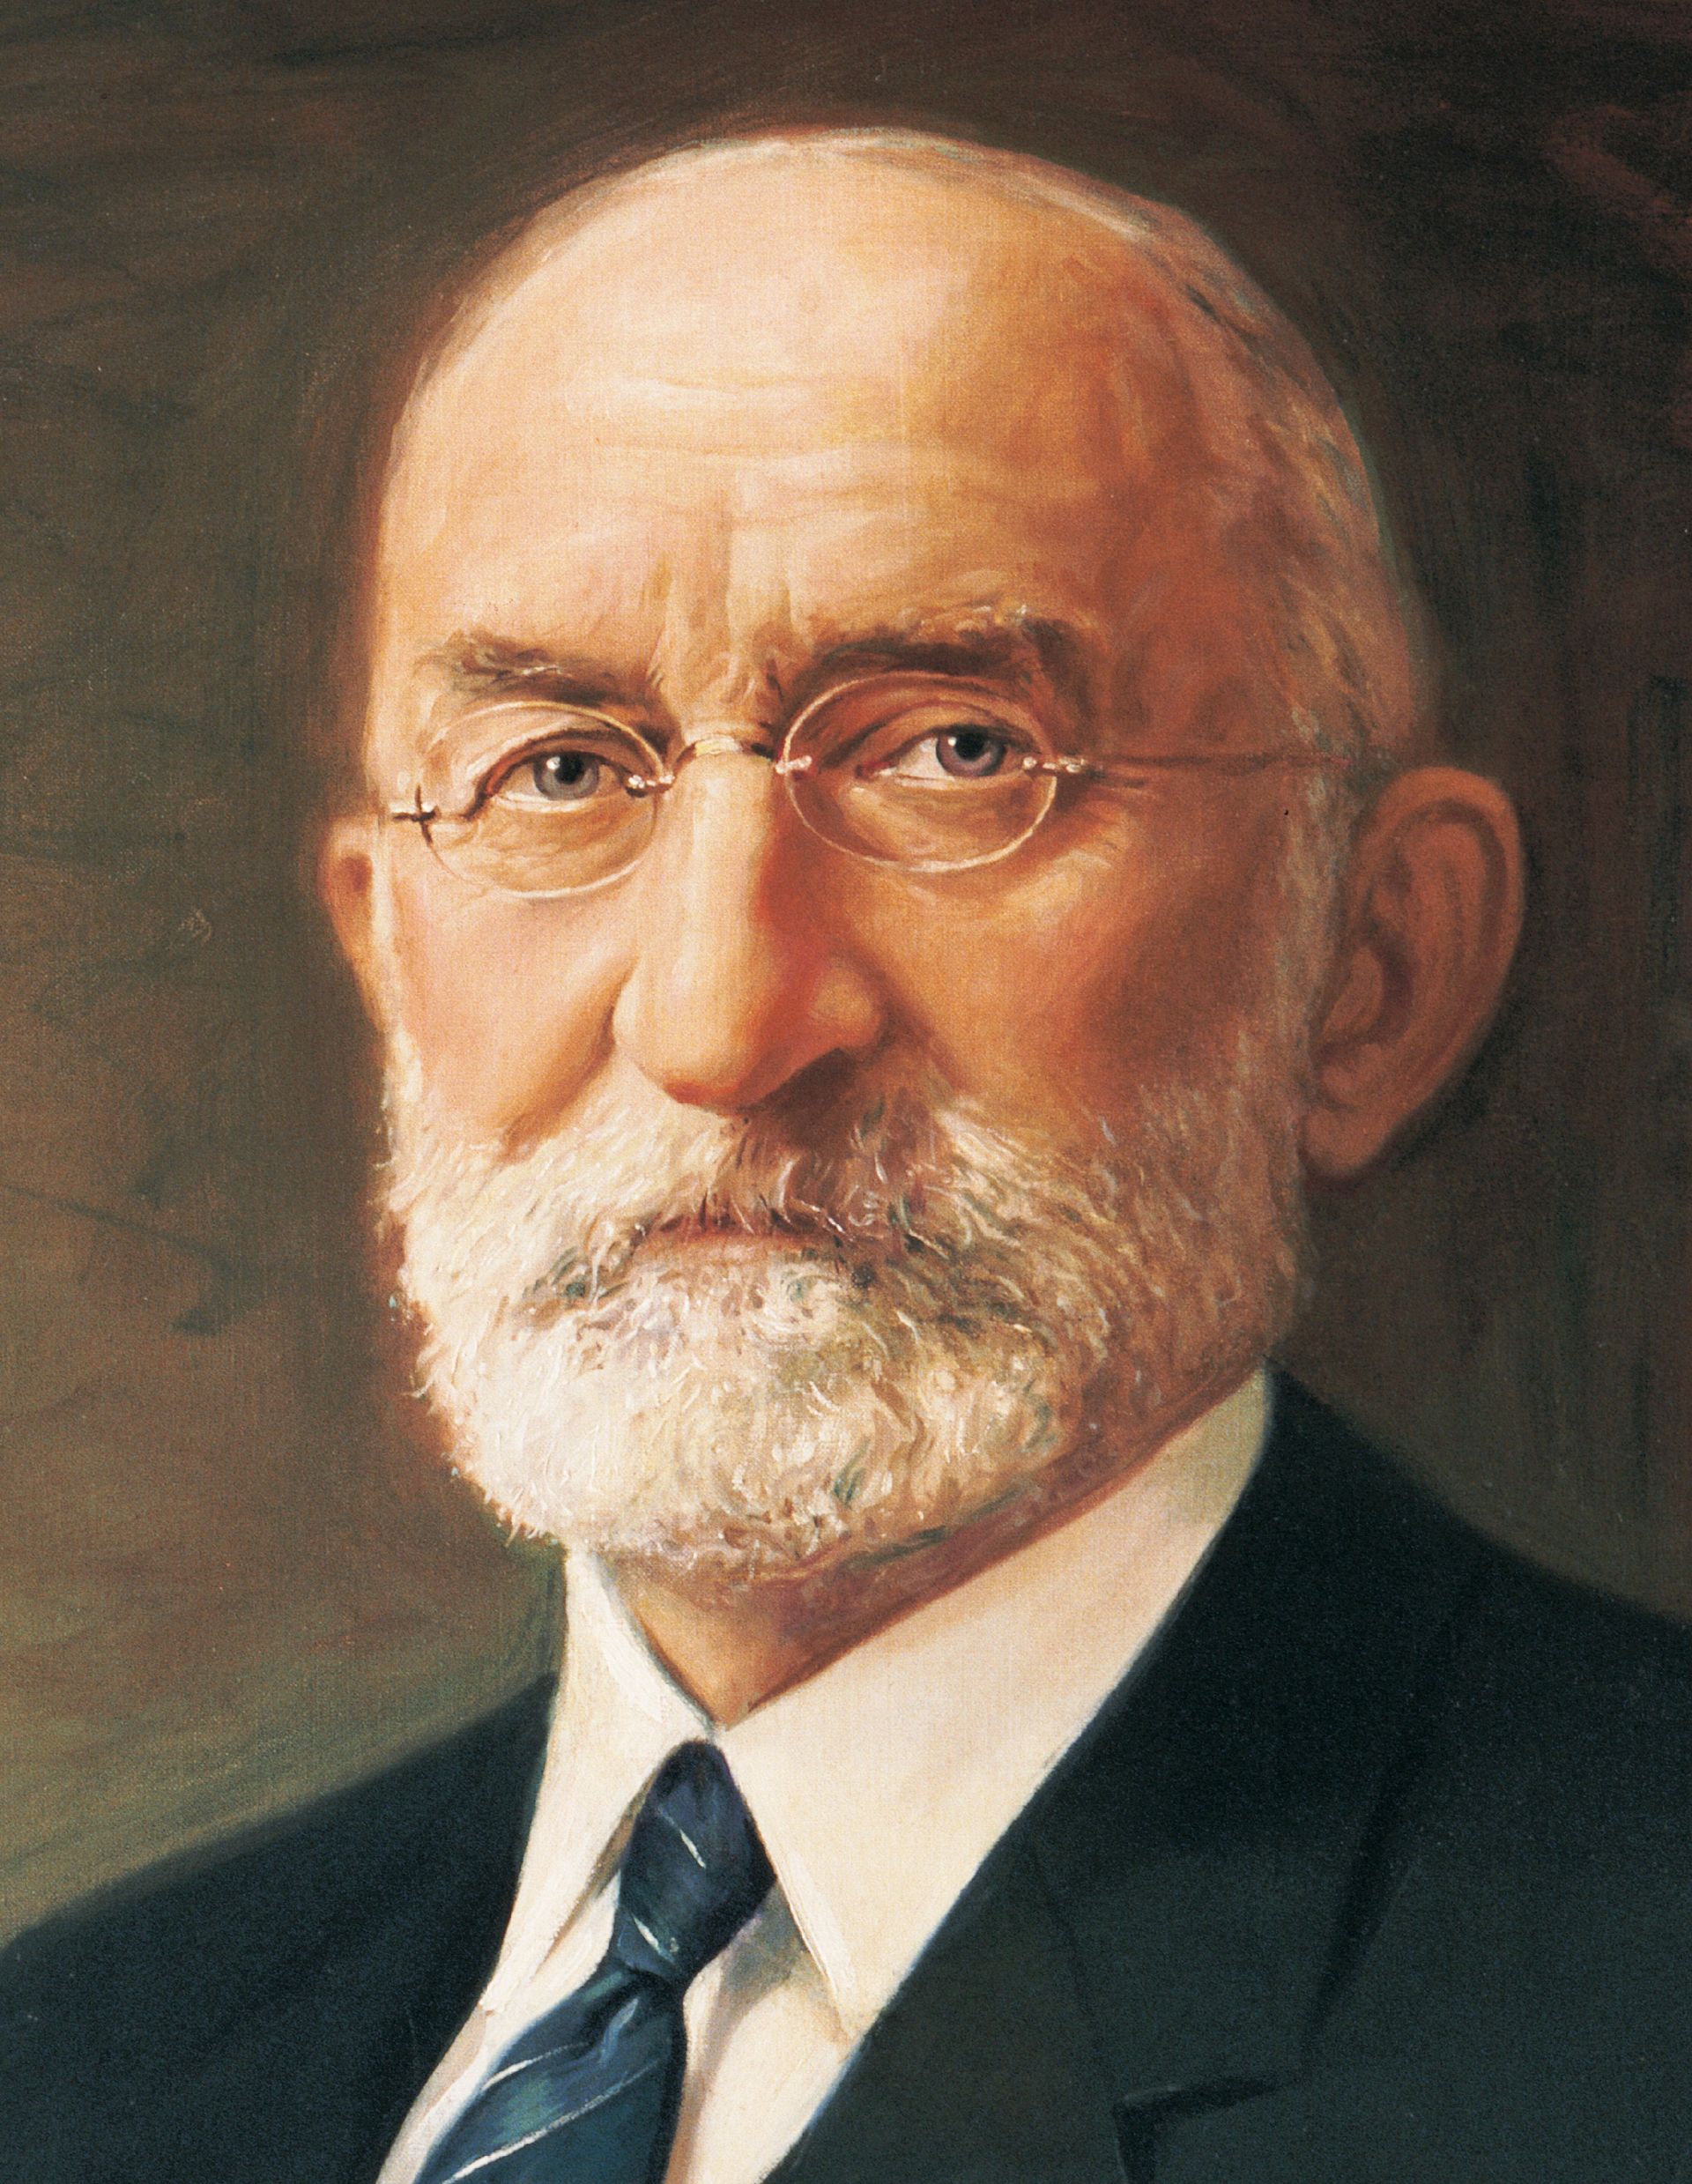 Heber J. Grant, by C. J. Fox; GAK 512; GAB 128; Our Heritage, 107–10. President Heber J. Grant was the seventh President of the Church from 1918 to 1945.